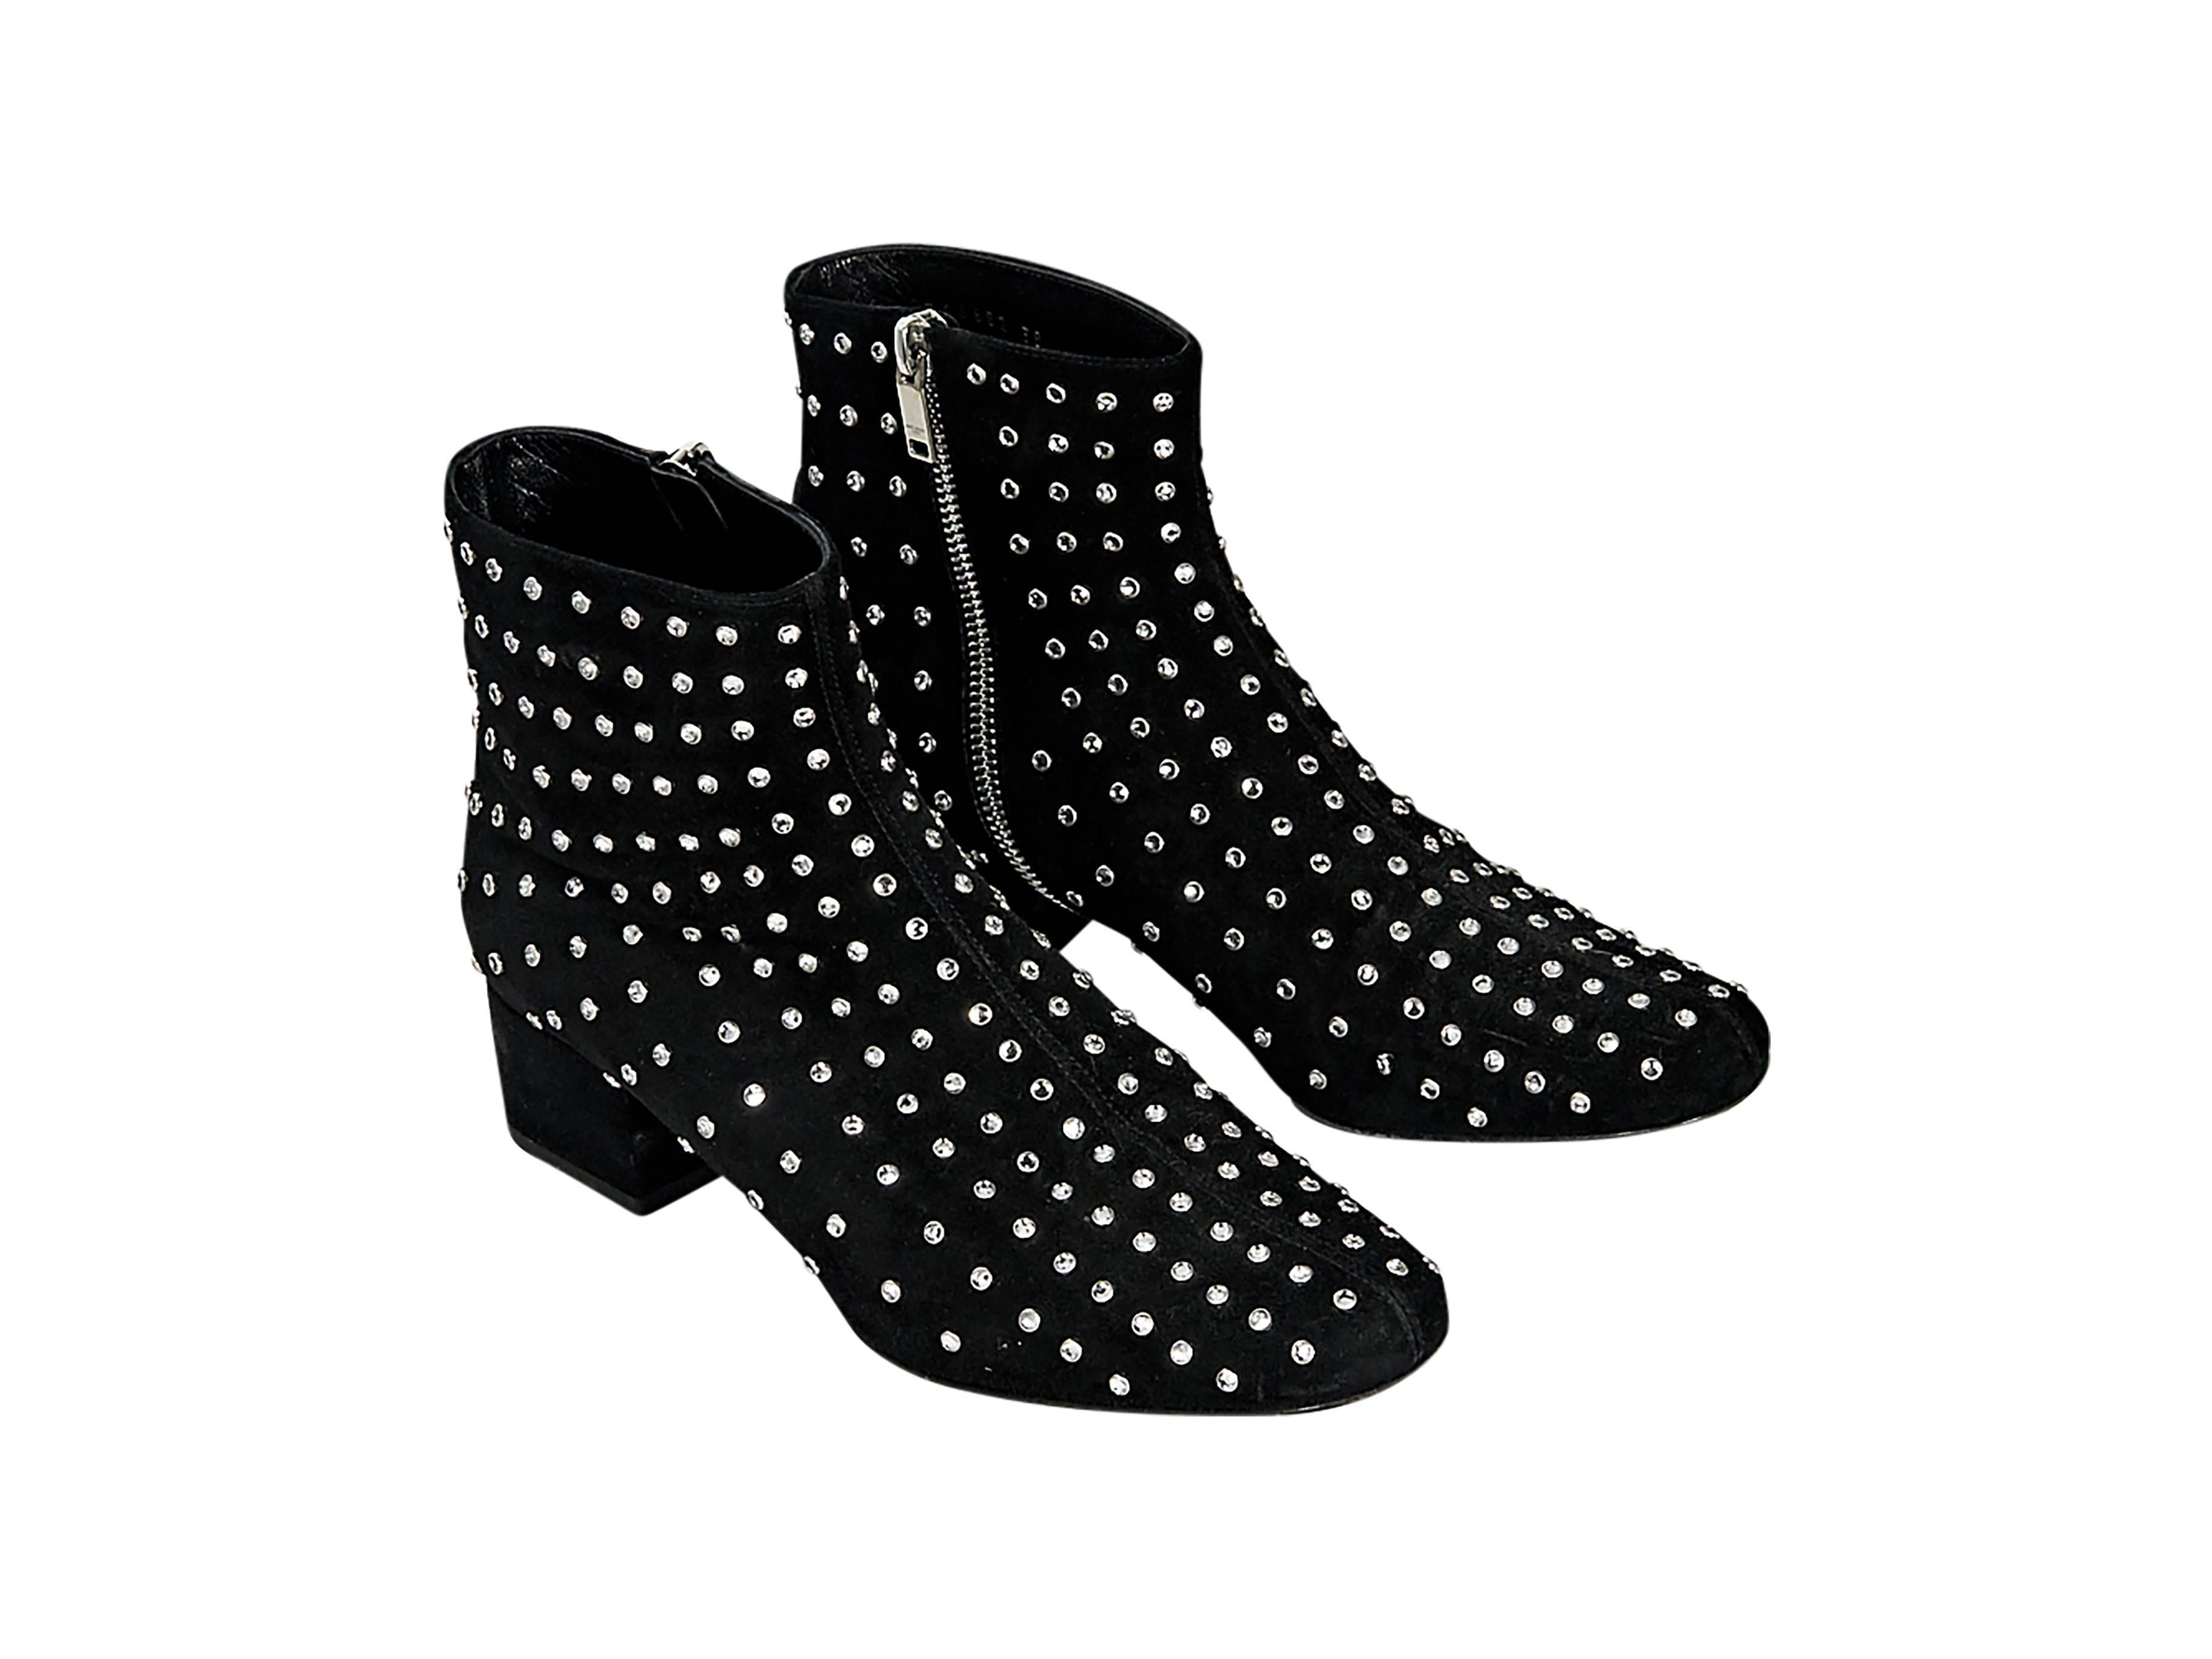 Product details:  Black suede Babies embellished ankle boots by Saint Laurent.  Inner zip closure.  Round toe.  Low block heel. Size 8
Condition: Pre-owned. Very good.

Est. Retail $ 1,564.00